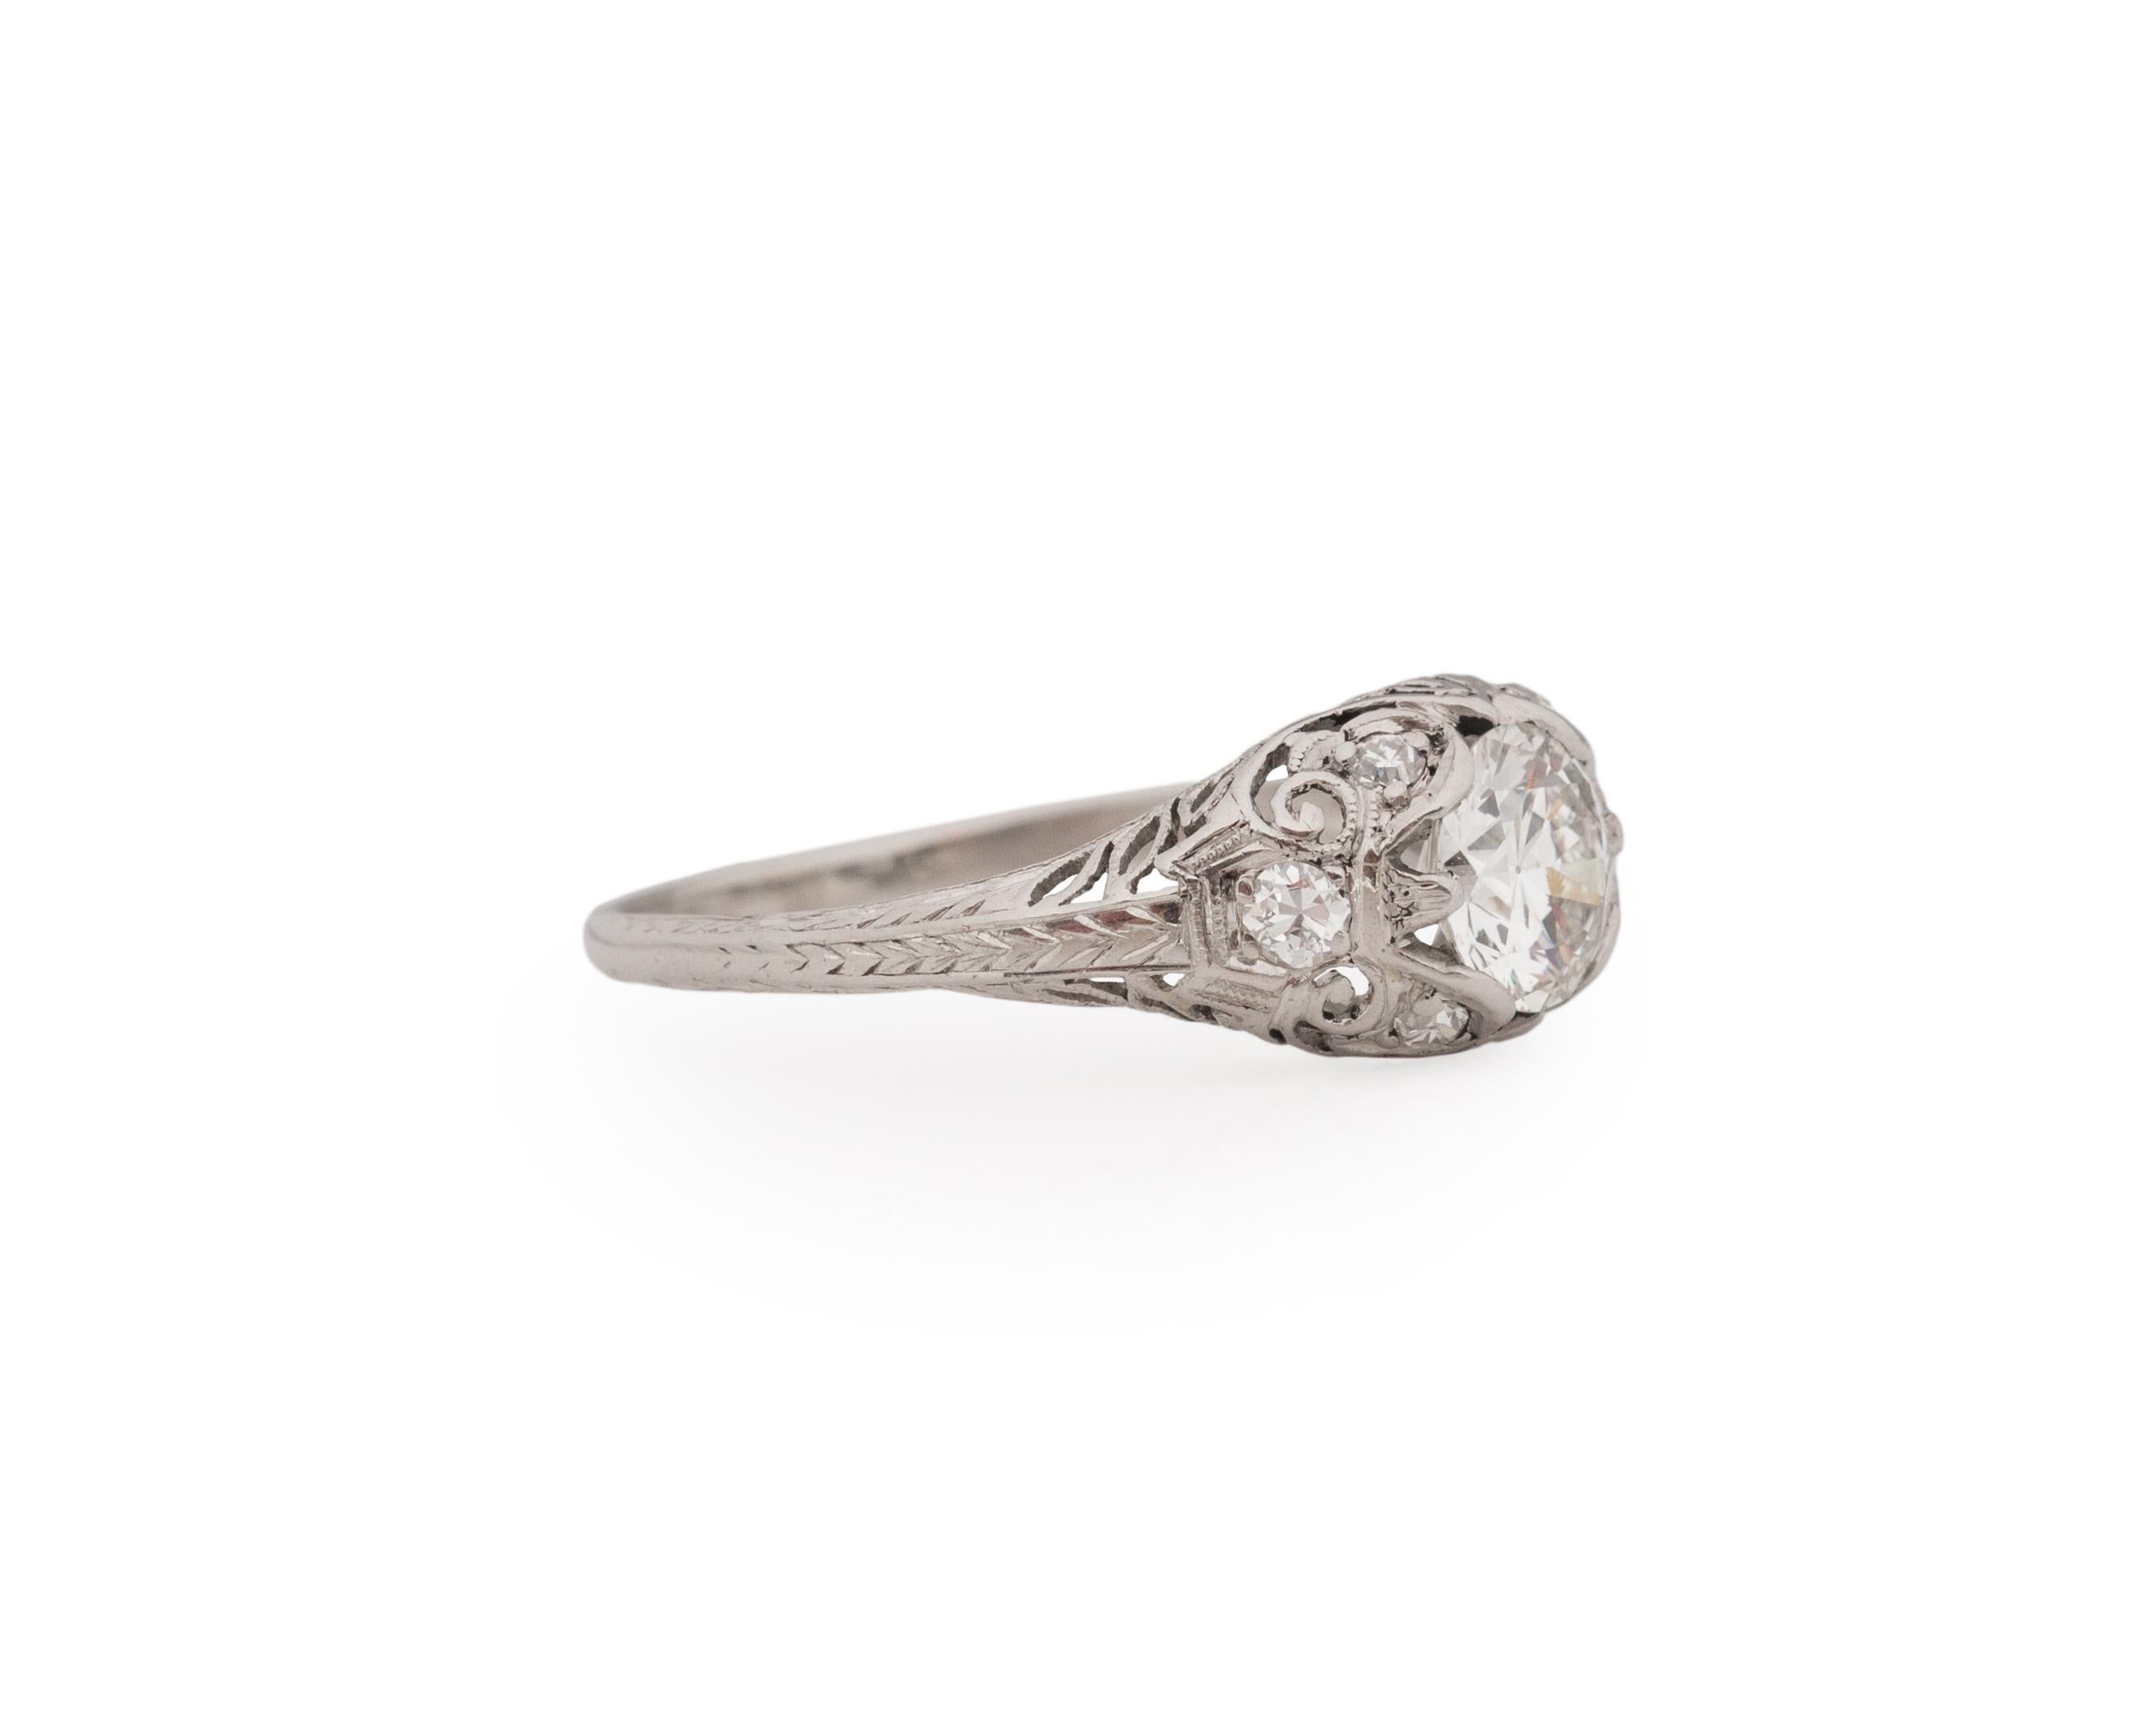 Ring Size: 8.25
Metal Type: Platinum [Hallmarked, and Tested]
Weight: .92 grams

Center Diamond Details:
GIA REPORT #: 5222547616
Weight: .92ct
Cut: Old European brilliant
Color: I
Clarity: VVS2
Measurements: 6.49mm x 6.40mm x 3.73mm

Finger to Top